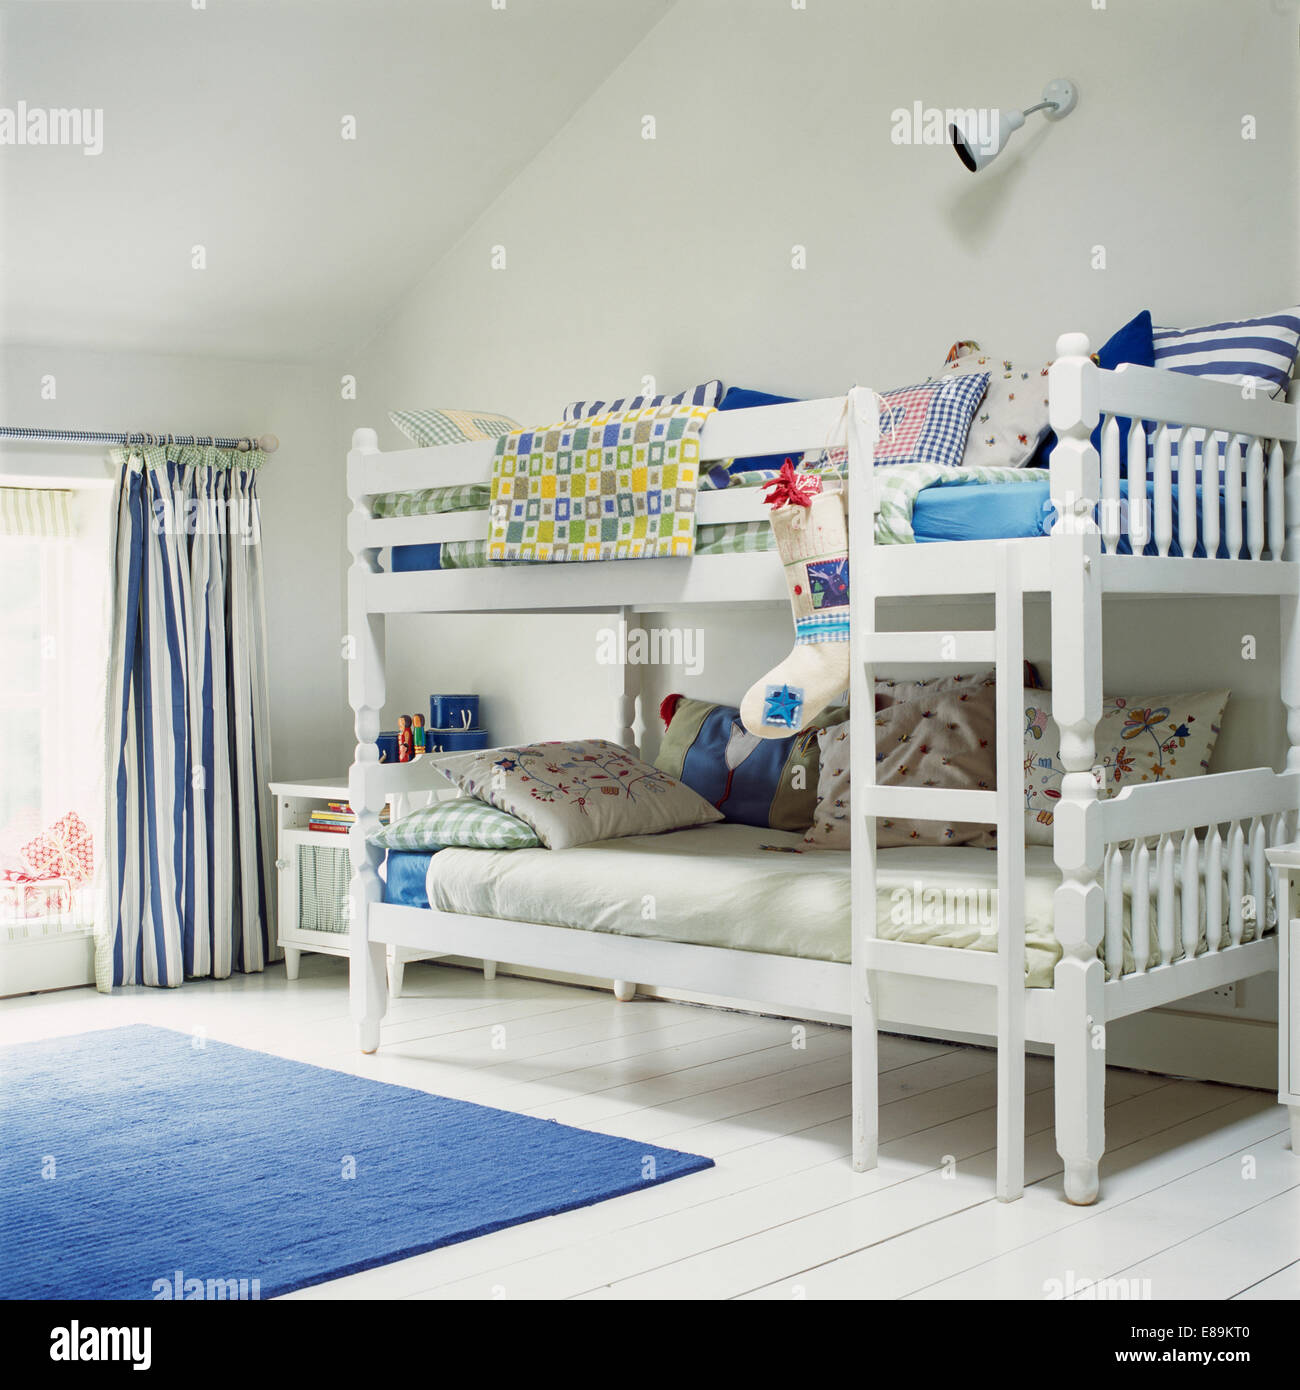 Christmas Stocking On White Bunk Beds Piled With Cushions In Stock